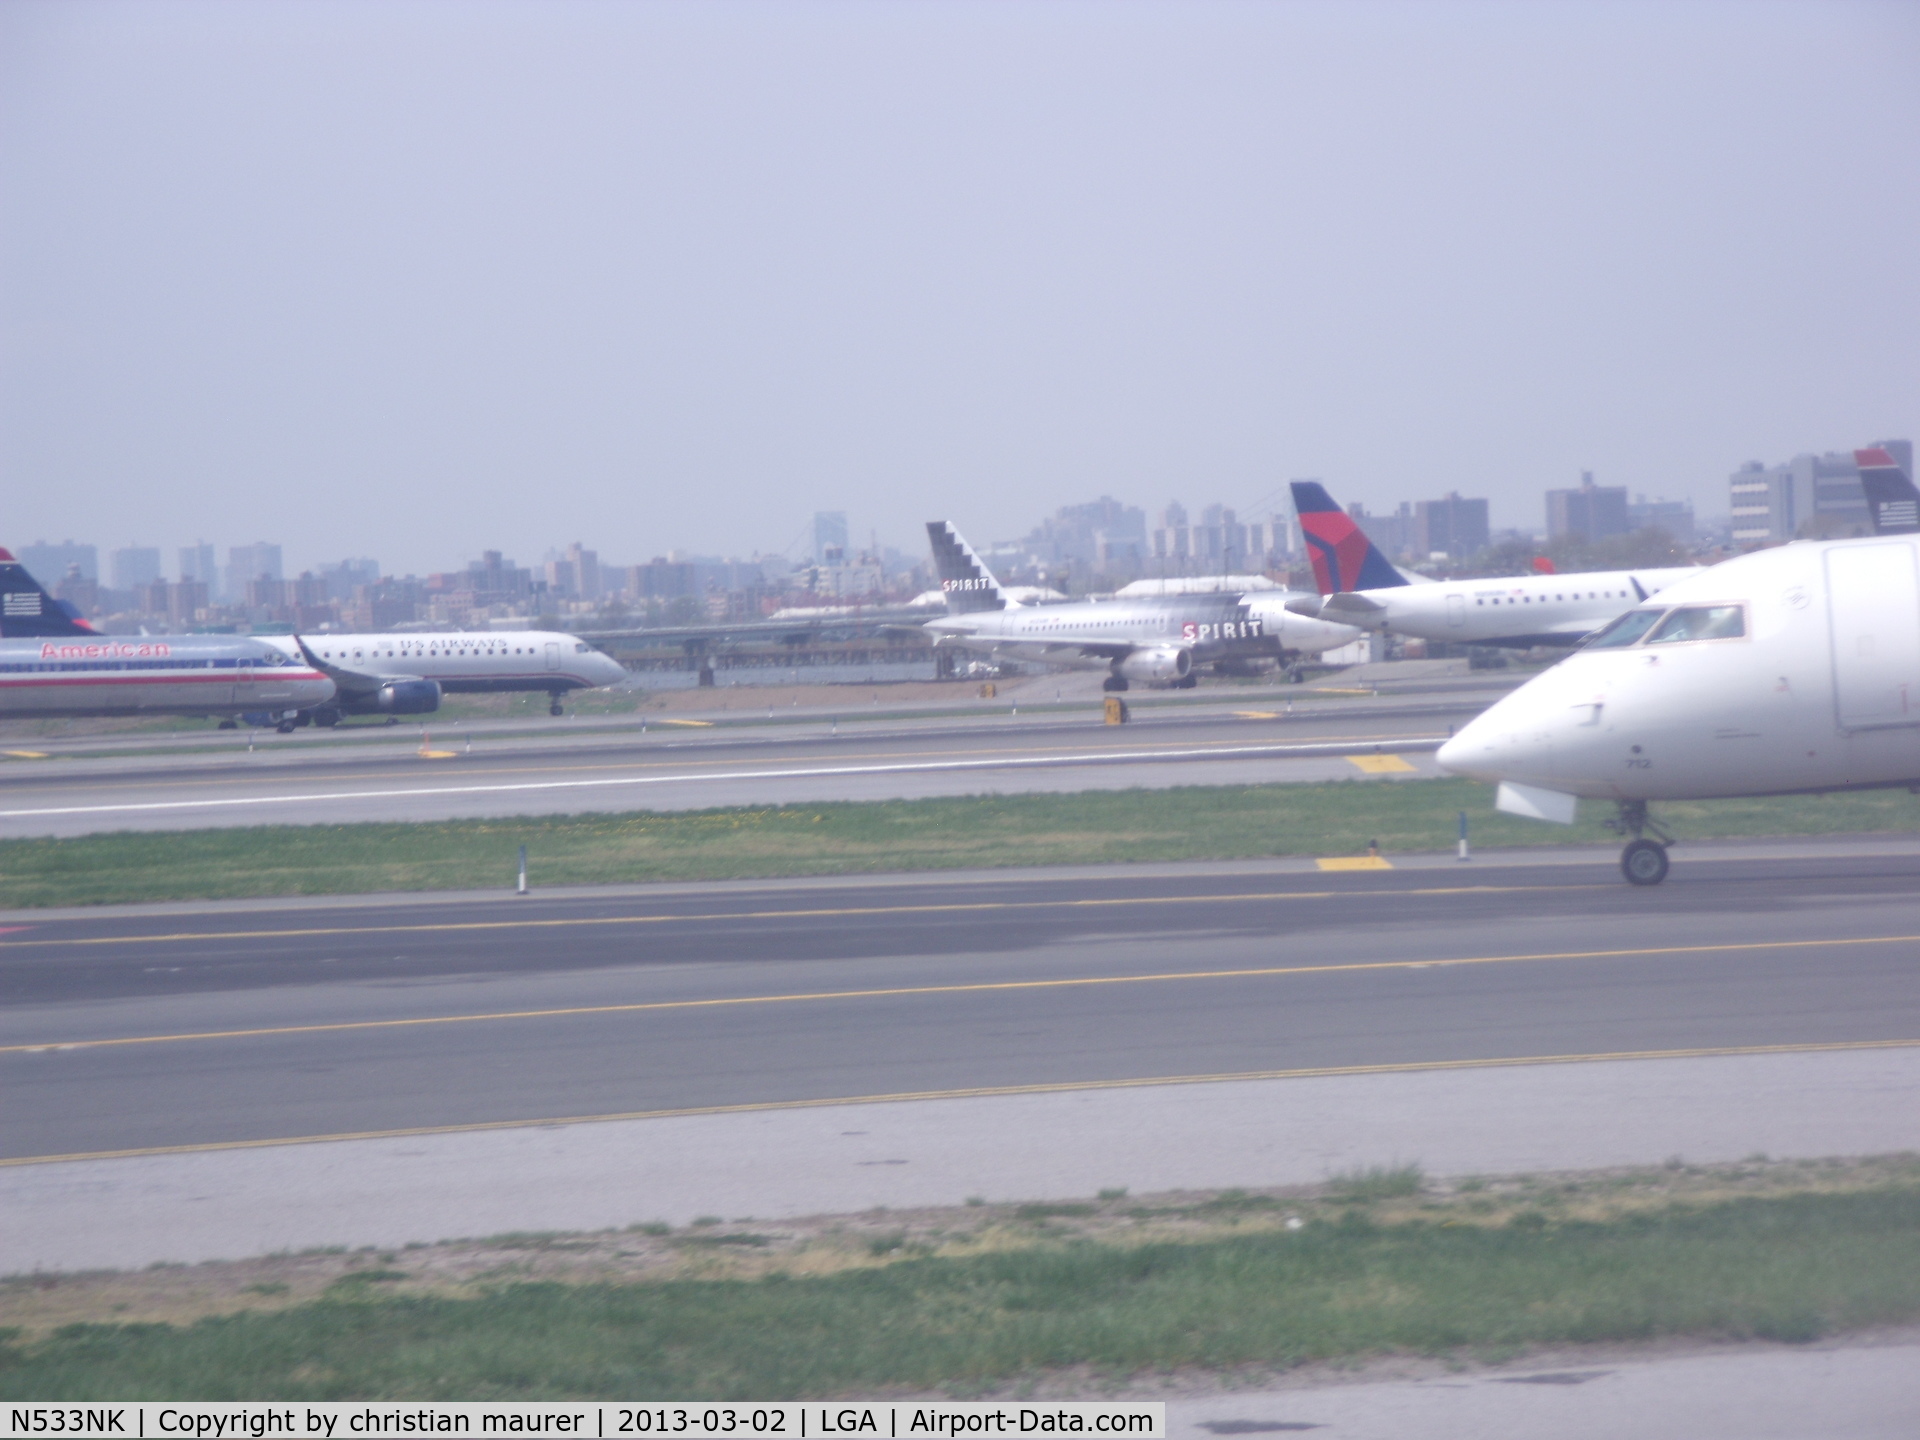 N533NK, 2008 Airbus A319-132 C/N 3393, SPRIT A319 WITH OTHER AIRCRAFT